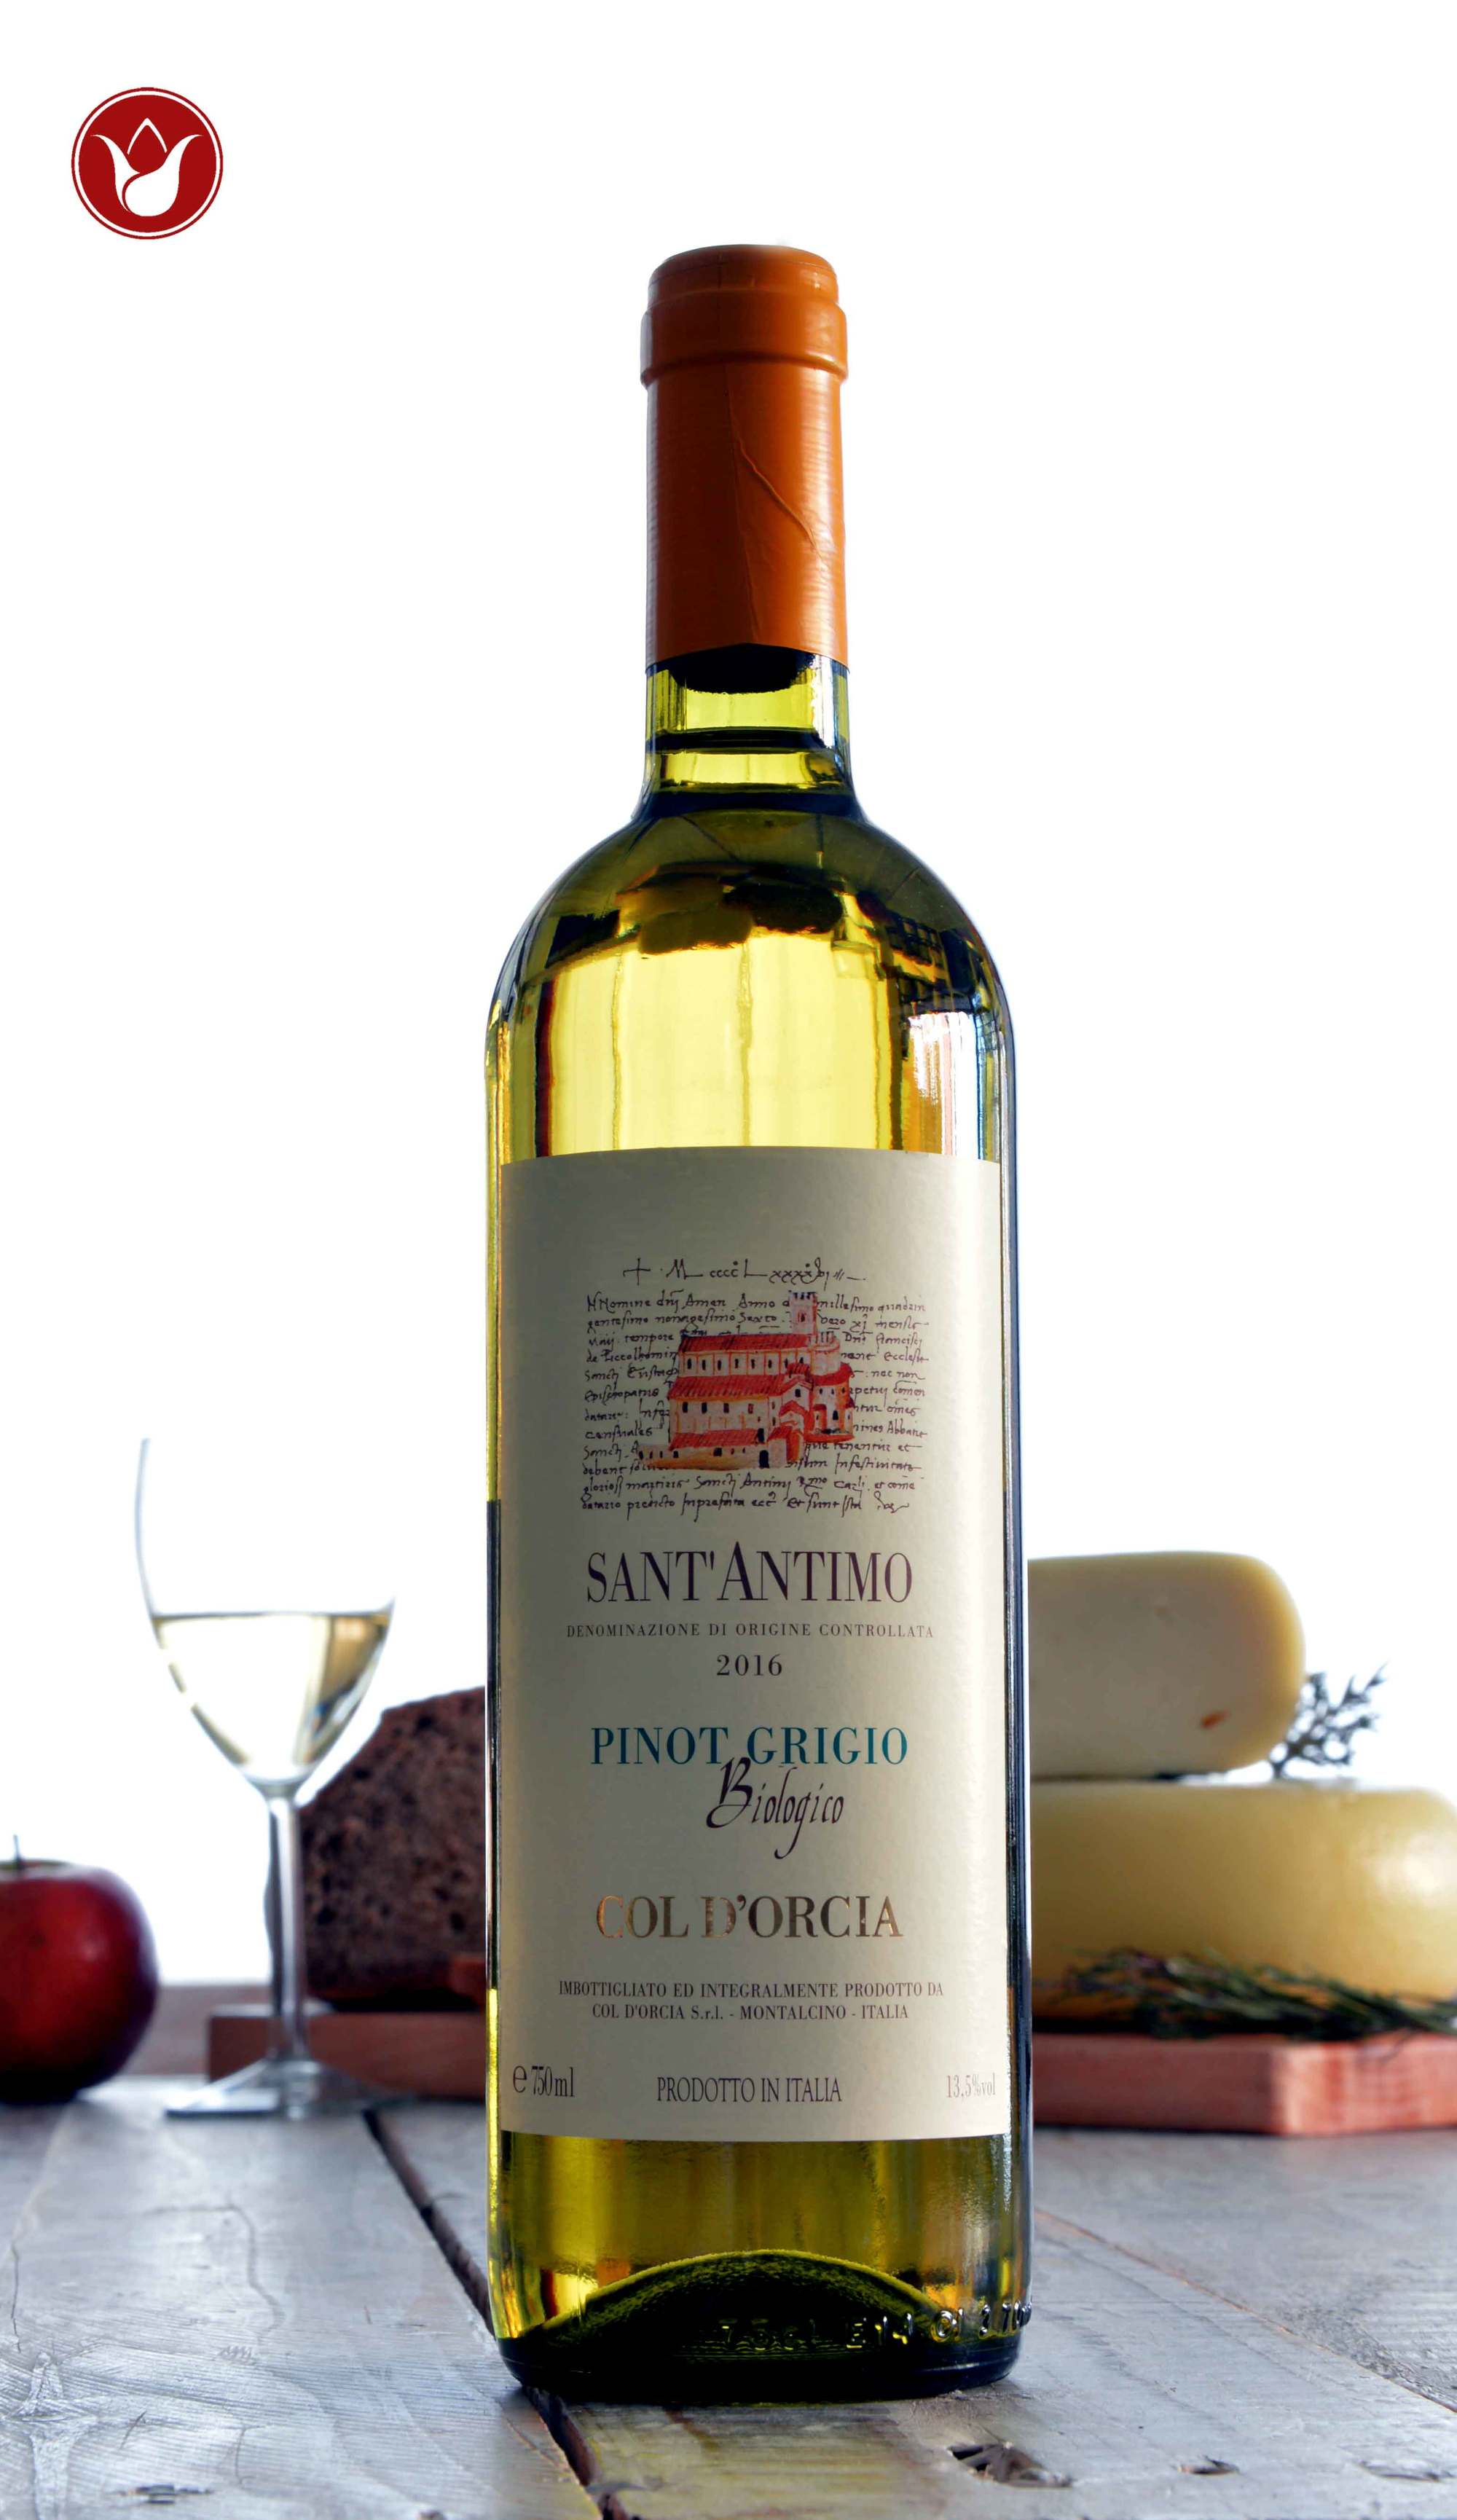 Pinot-grigio-Col-d'Orcia